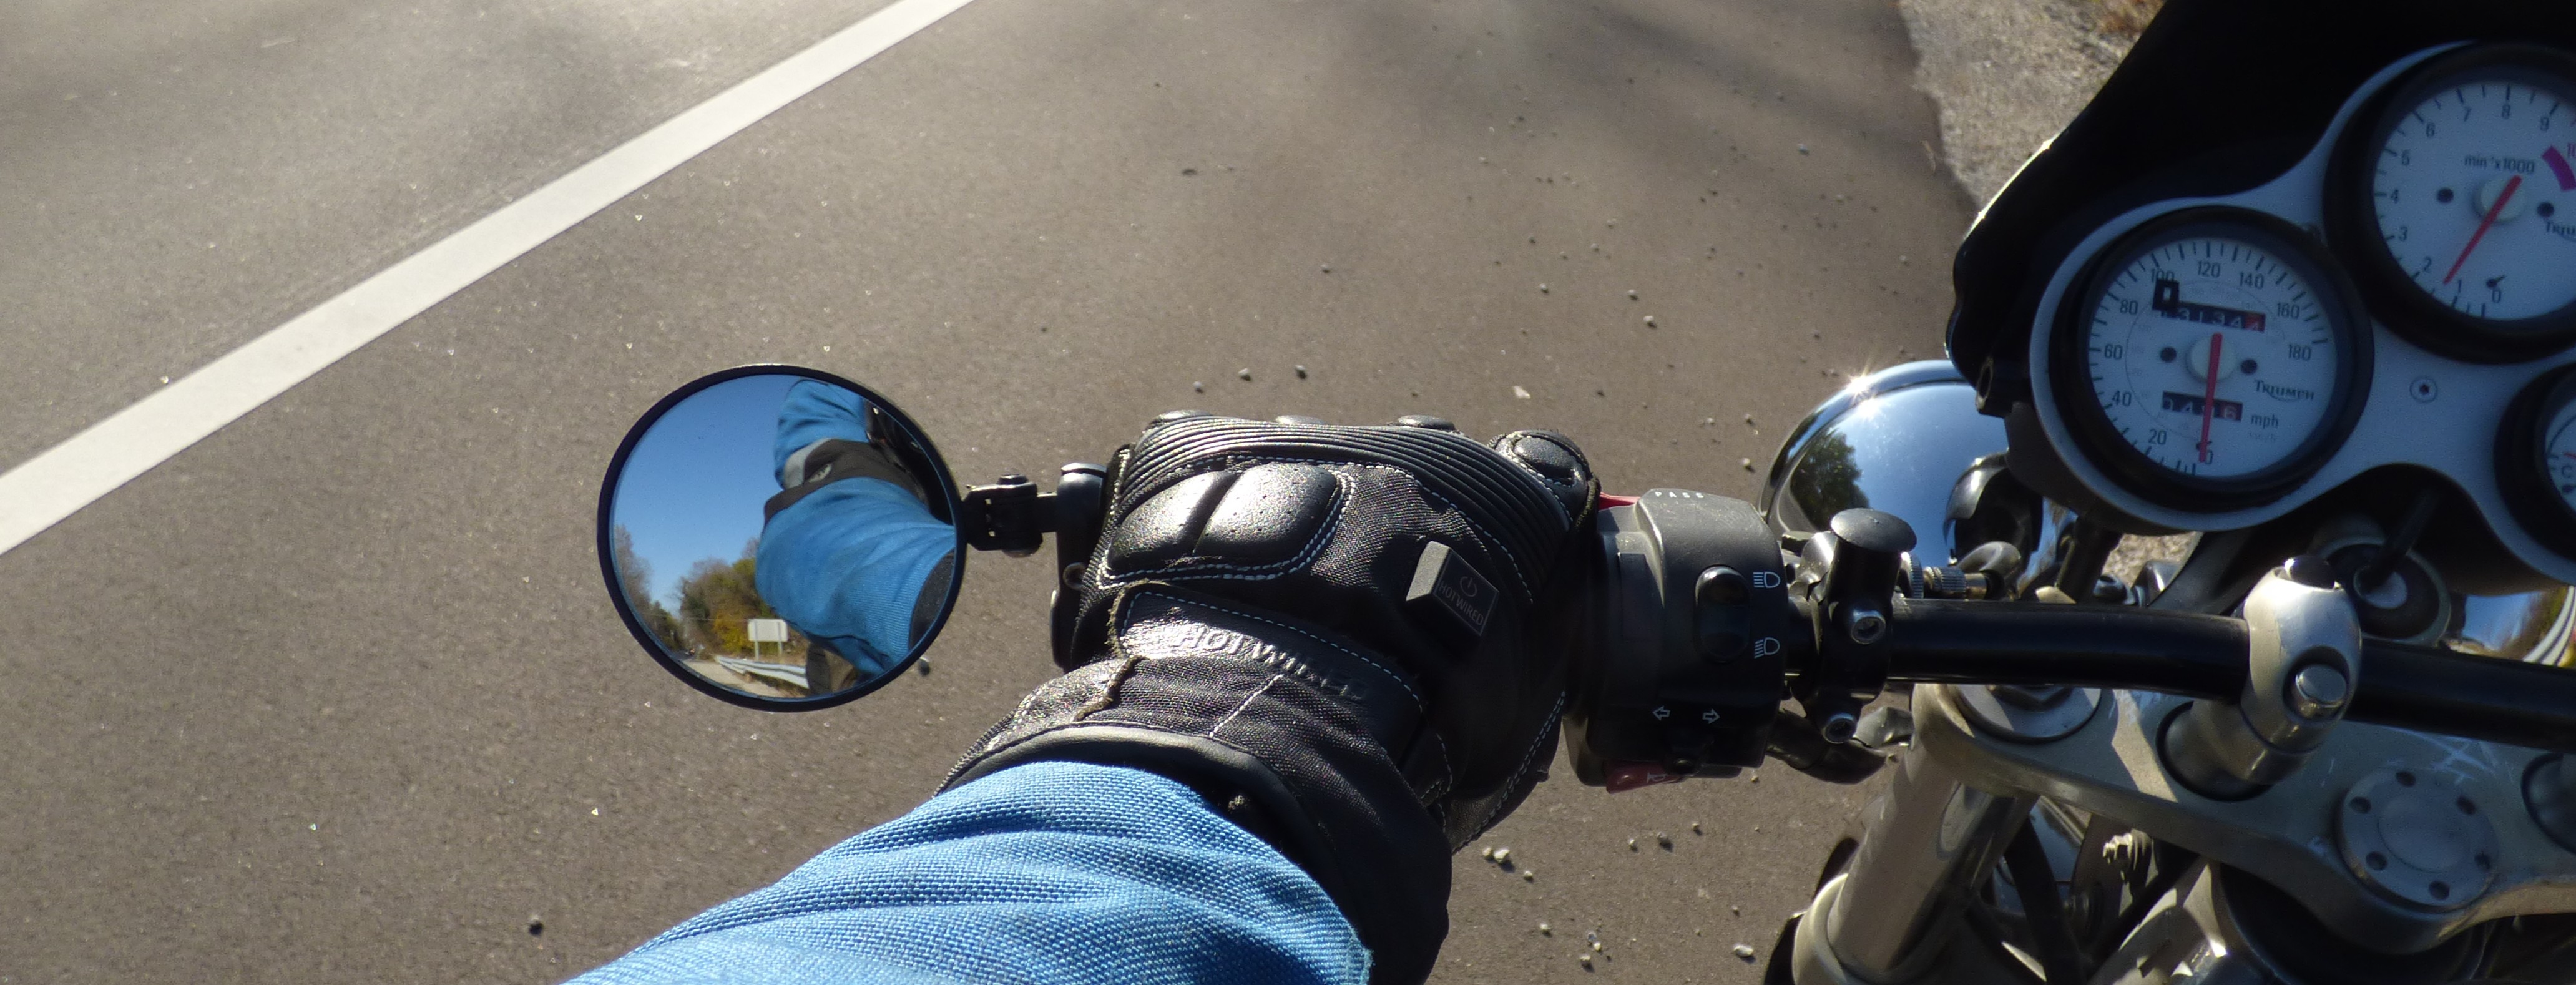 Hotwired 12V heated motorcycle gloves review